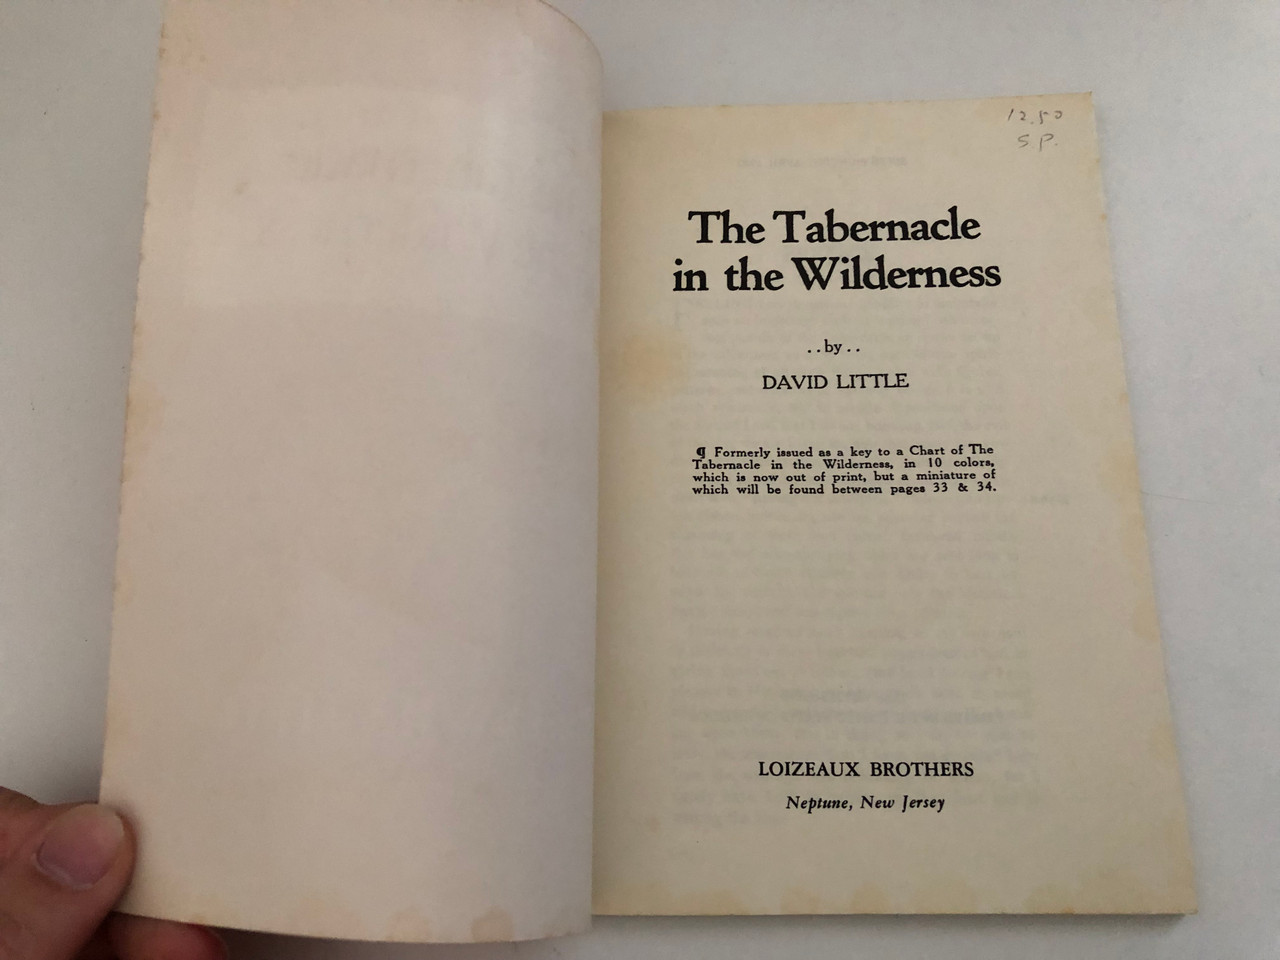 https://cdn10.bigcommerce.com/s-62bdpkt7pb/products/53518/images/271484/The_Tabernacle_in_the_Wilderness_by_David_Little_Loizeaux_Brothers_1982_Printed_in_United_States_of_America_872135211__79804.1680196594.1280.1280.JPG?c=2&_gl=1*pco74w*_ga*MzA5MjcwMDY5LjE2Nzk3NDk1MDE.*_ga_WS2VZYPC6G*MTY4MDE3NjQ4NS41LjEuMTY4MDE5NjYzNS4yOS4wLjA.